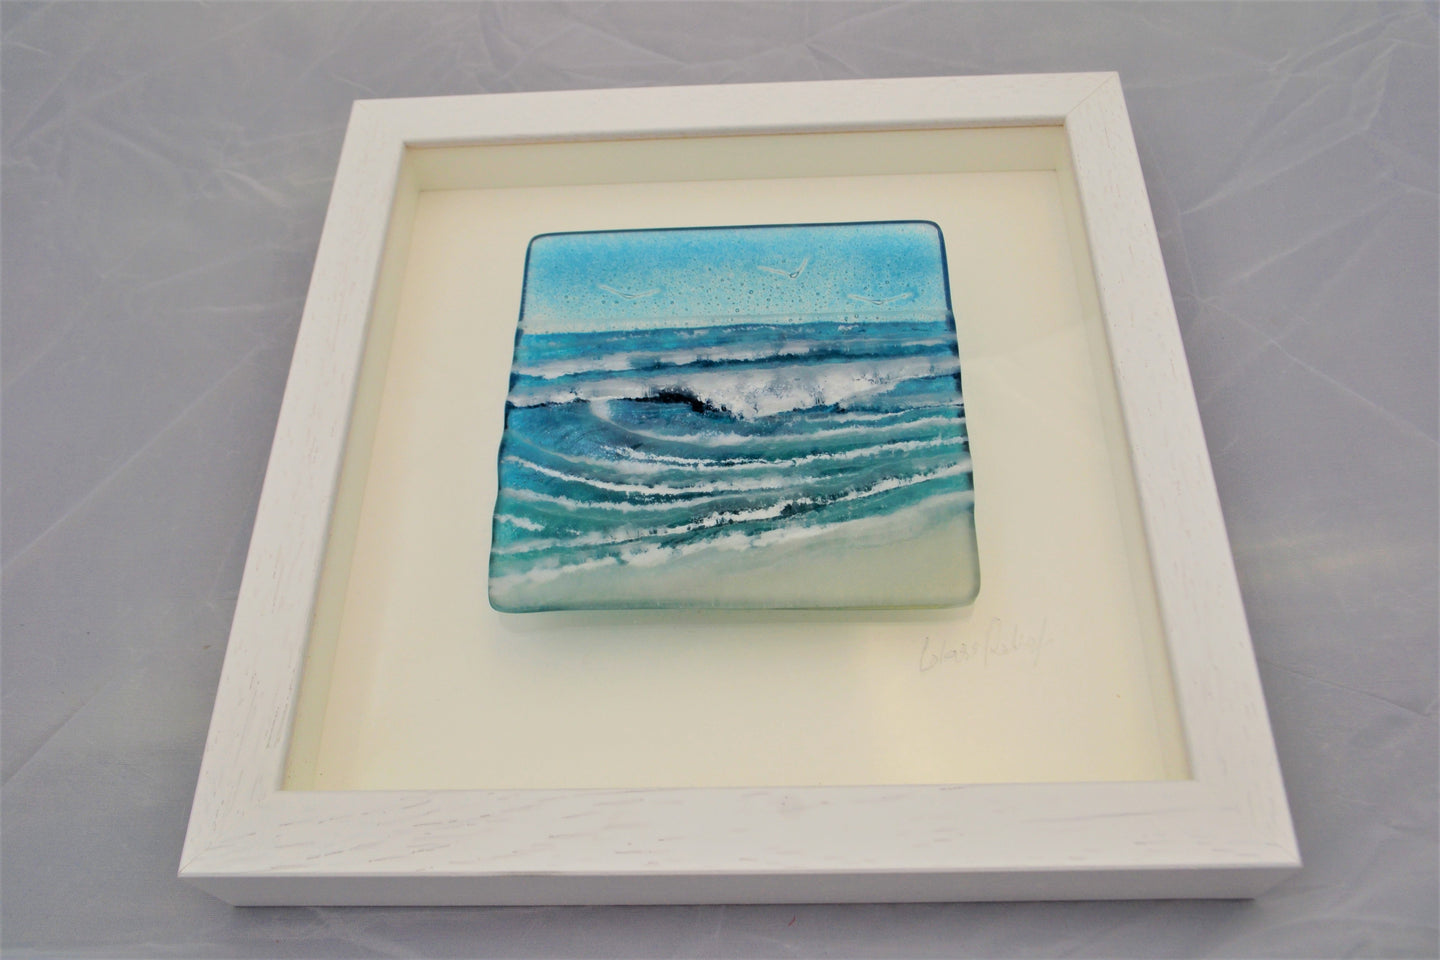 Glass Relief - Wave in a box